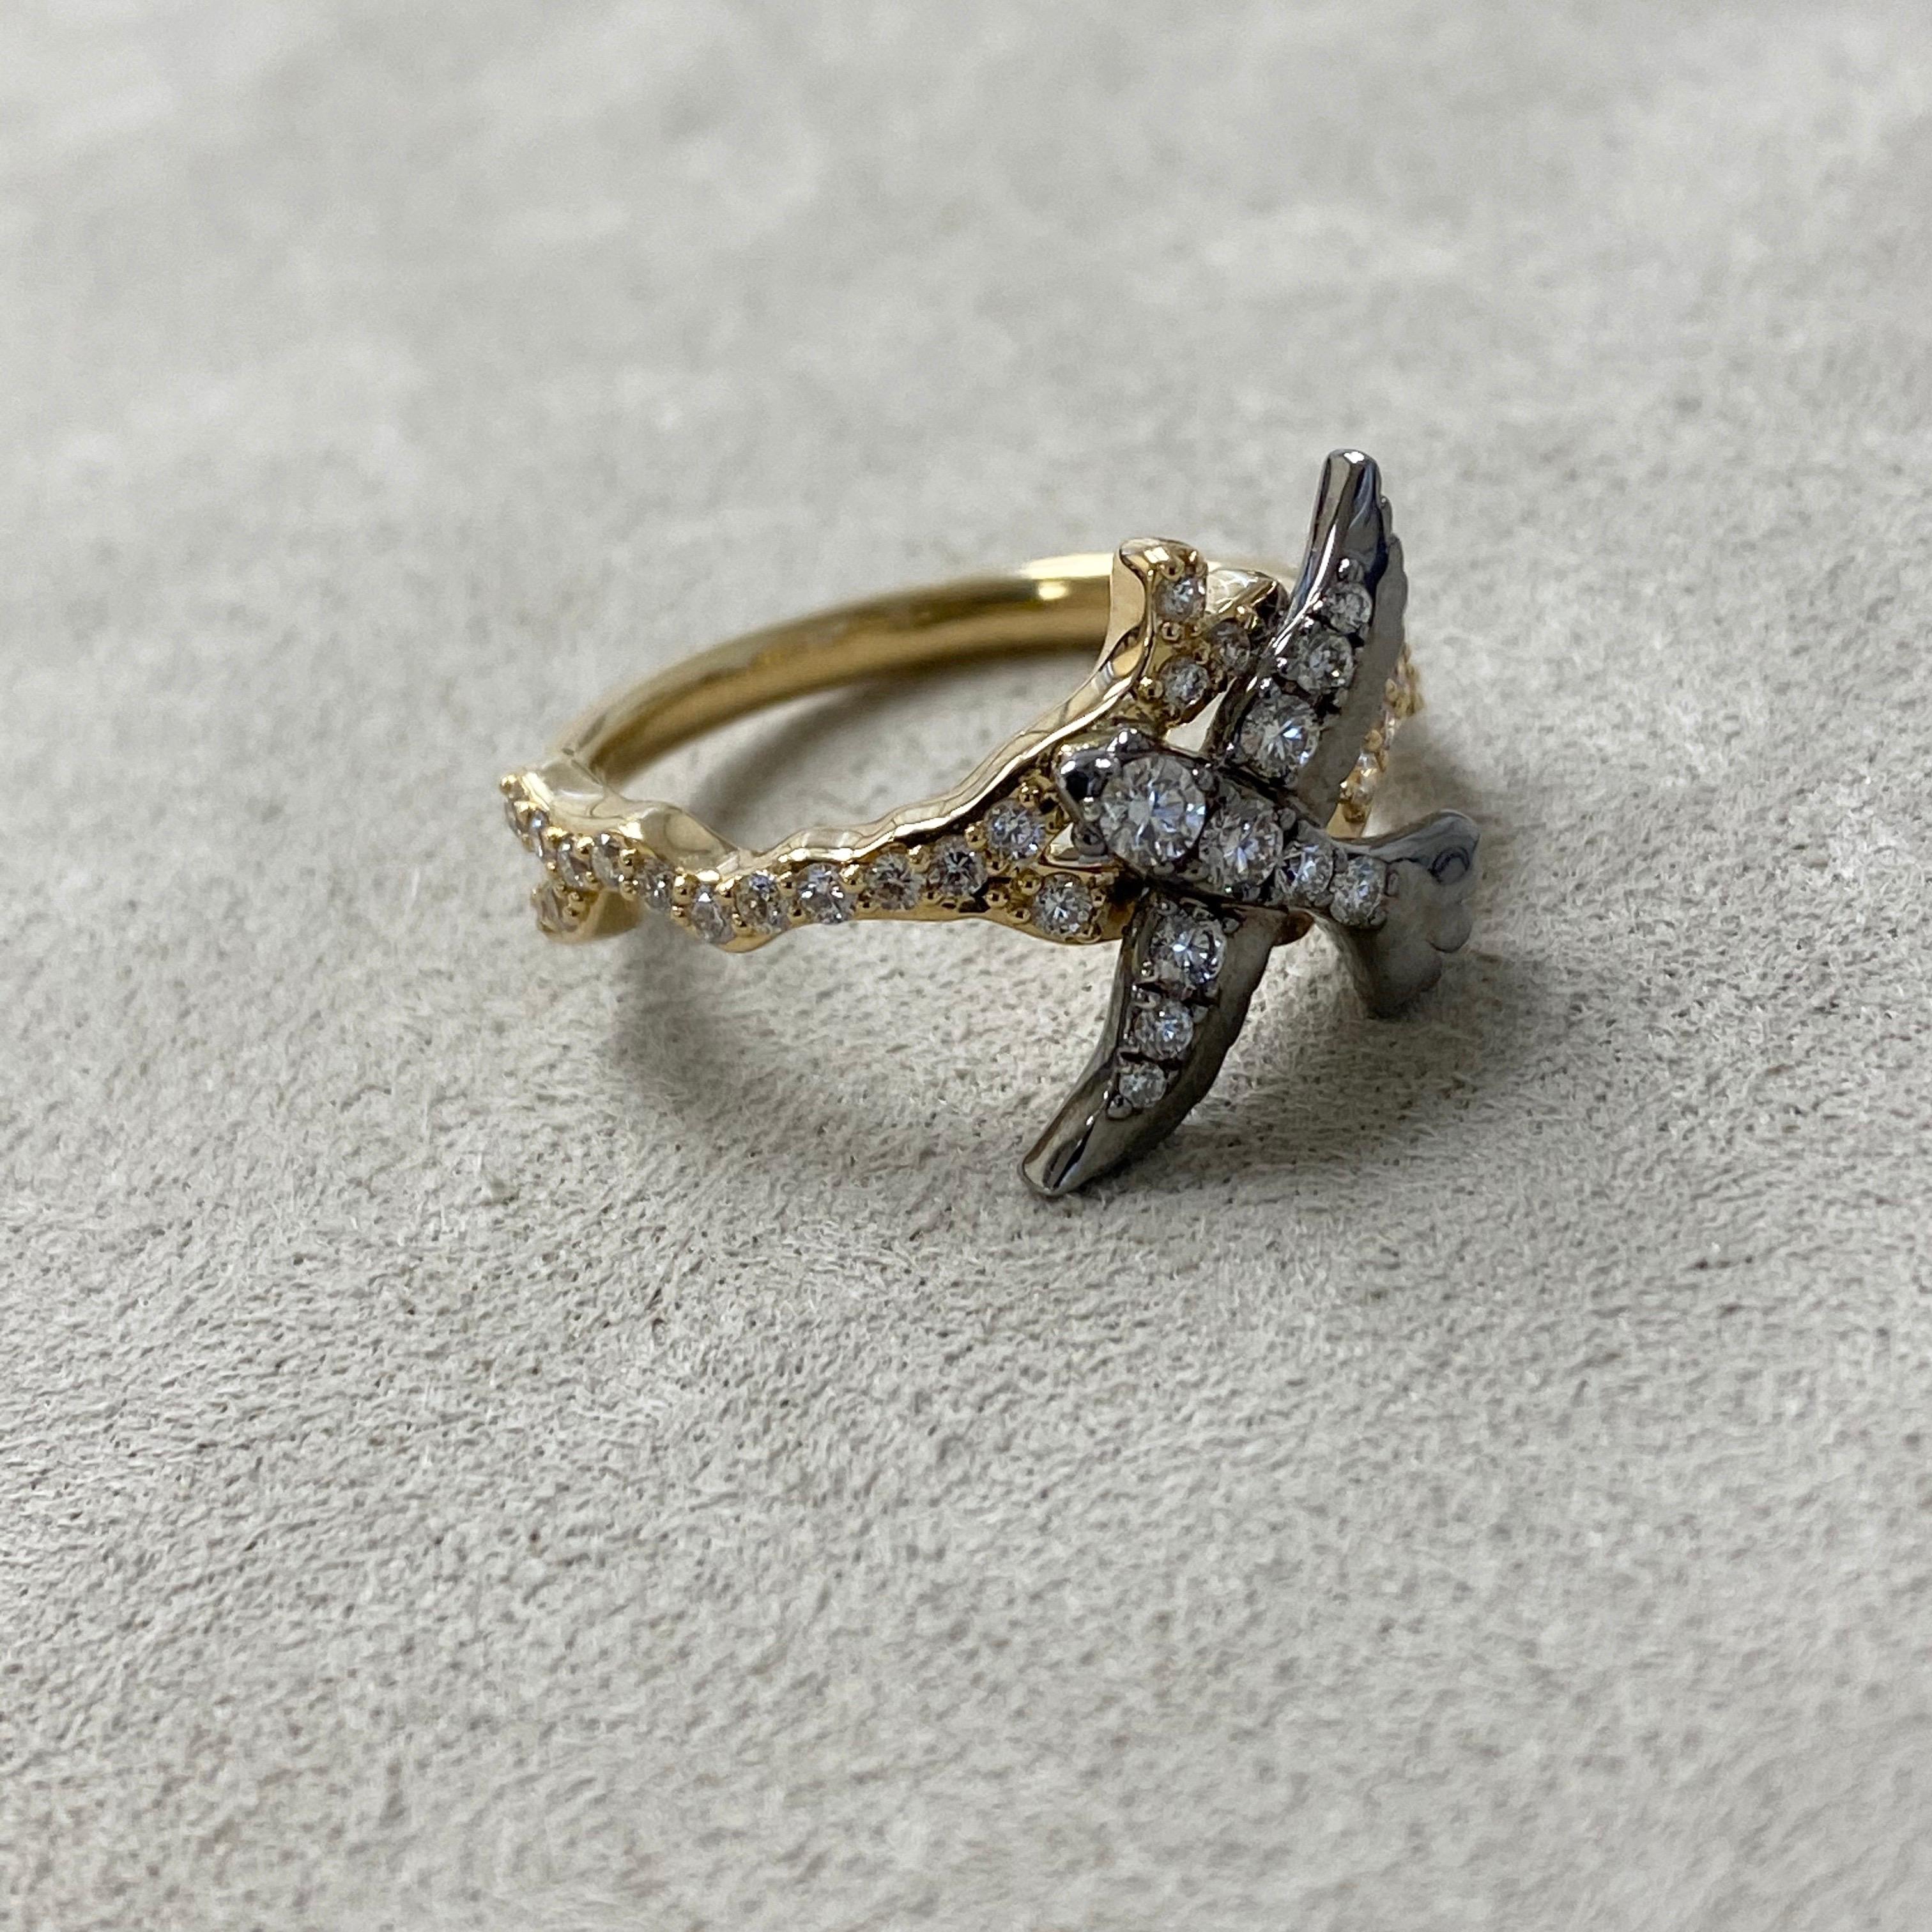 Created in 18kyg & oxidized silver 
Diamonds 0.40 cts approx
Ring size US 6.5
Limited edition 


About the Designers 

Drawing inspiration from little things, Dharmesh & Namrata Kothari have created an extraordinary and refreshing collection of